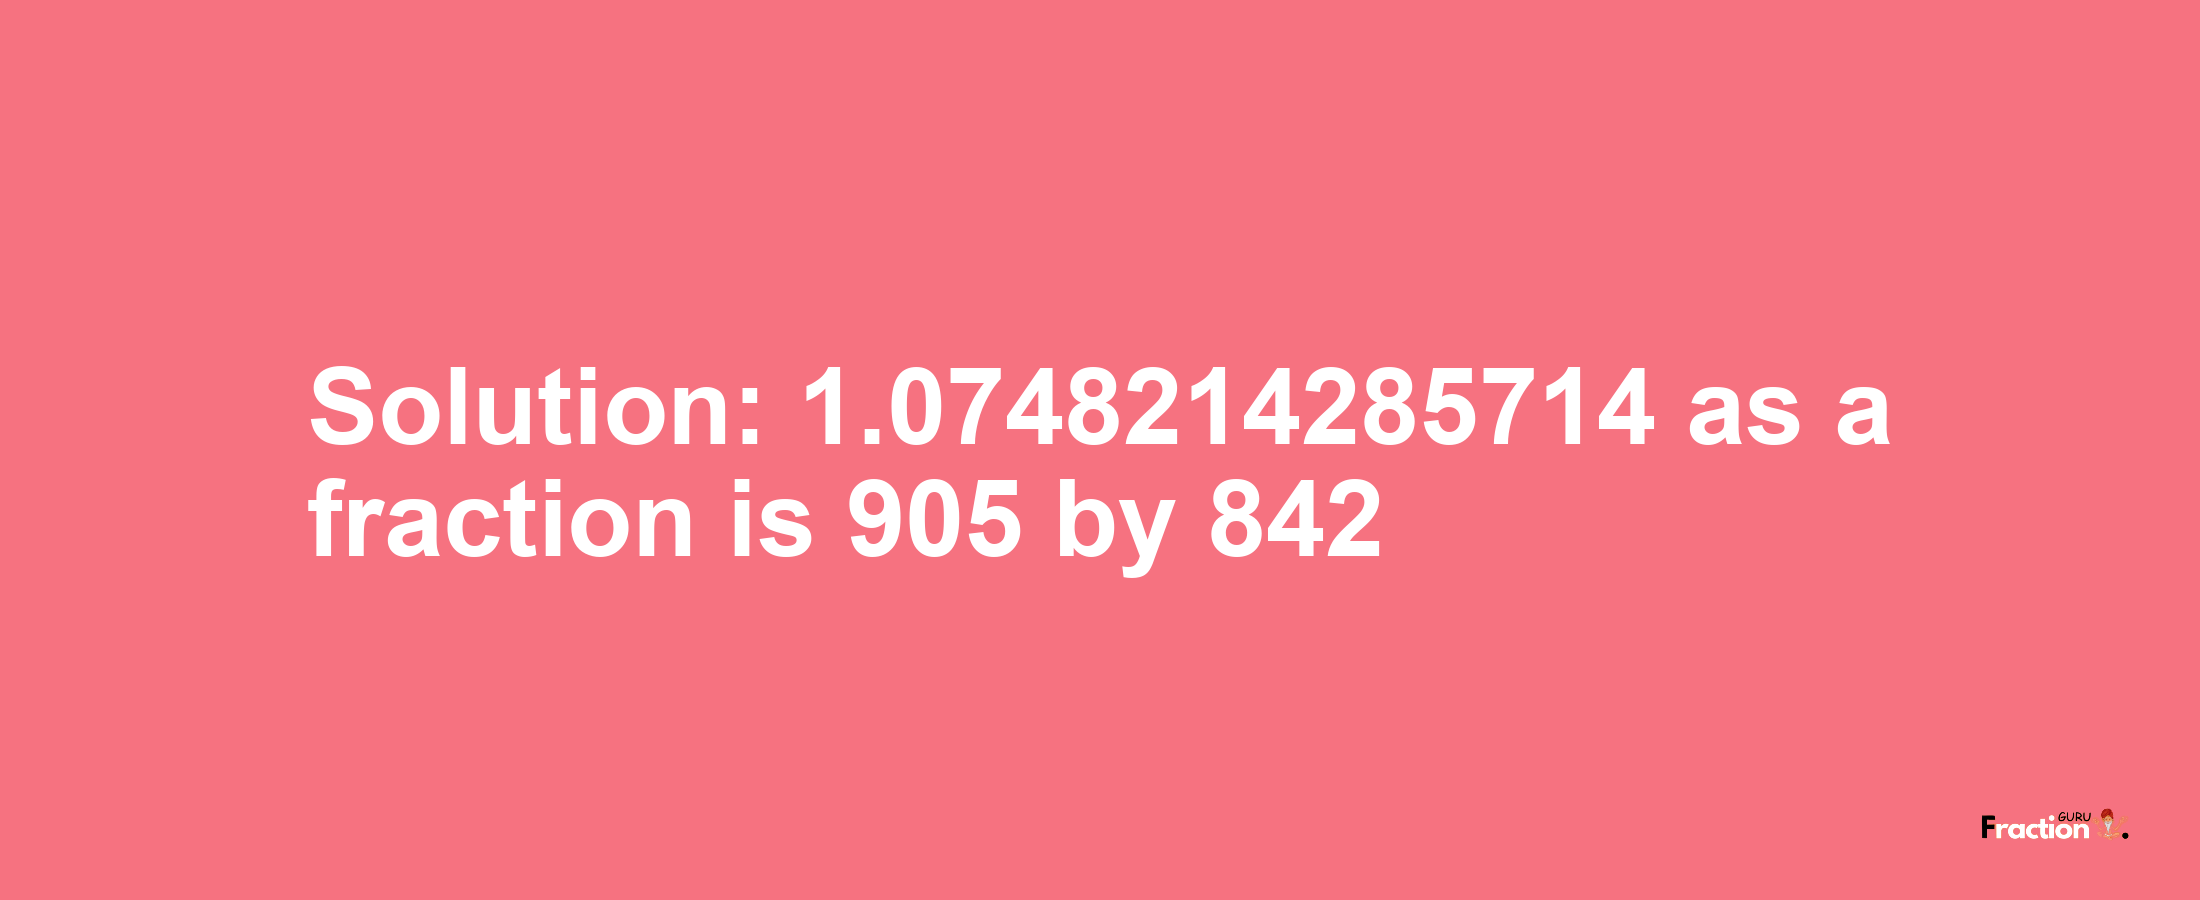 Solution:1.0748214285714 as a fraction is 905/842